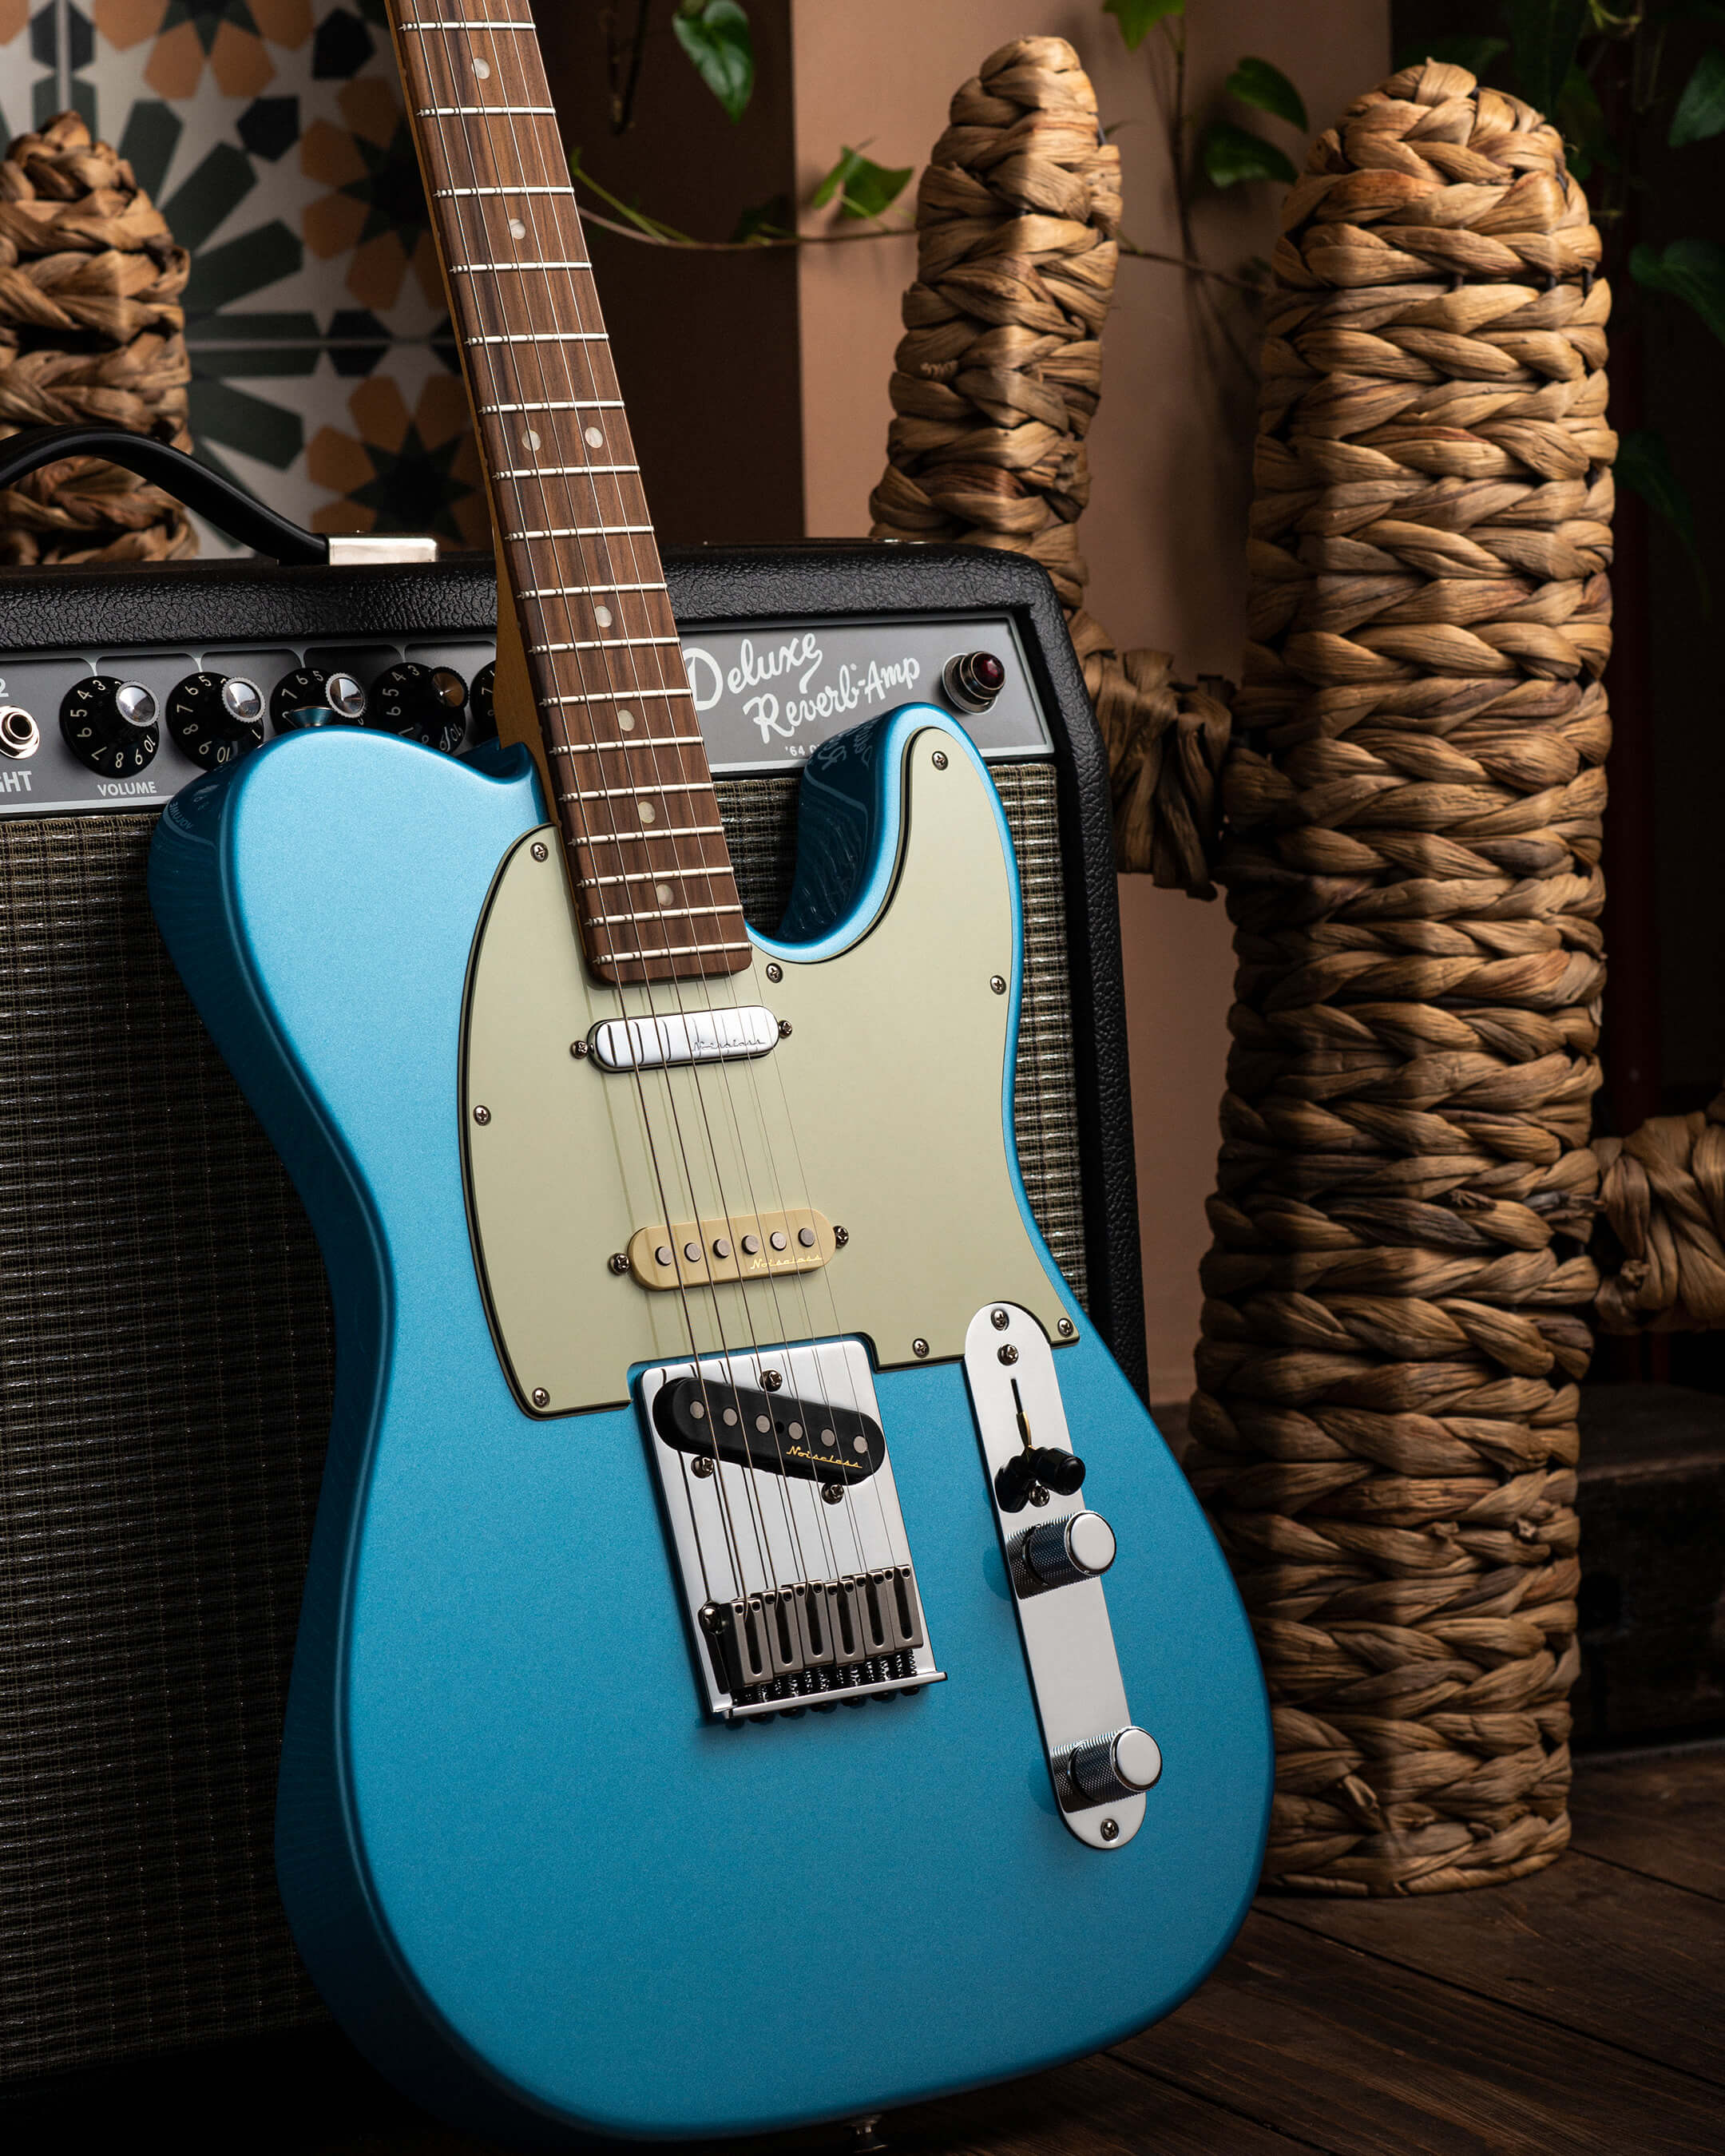 Slip shoes Prescribe What The Big Review: Fender Player Plus Stratocaster, Stratocaster HSS and  Nashville Telecaster | Guitar.com | All Things Guitar